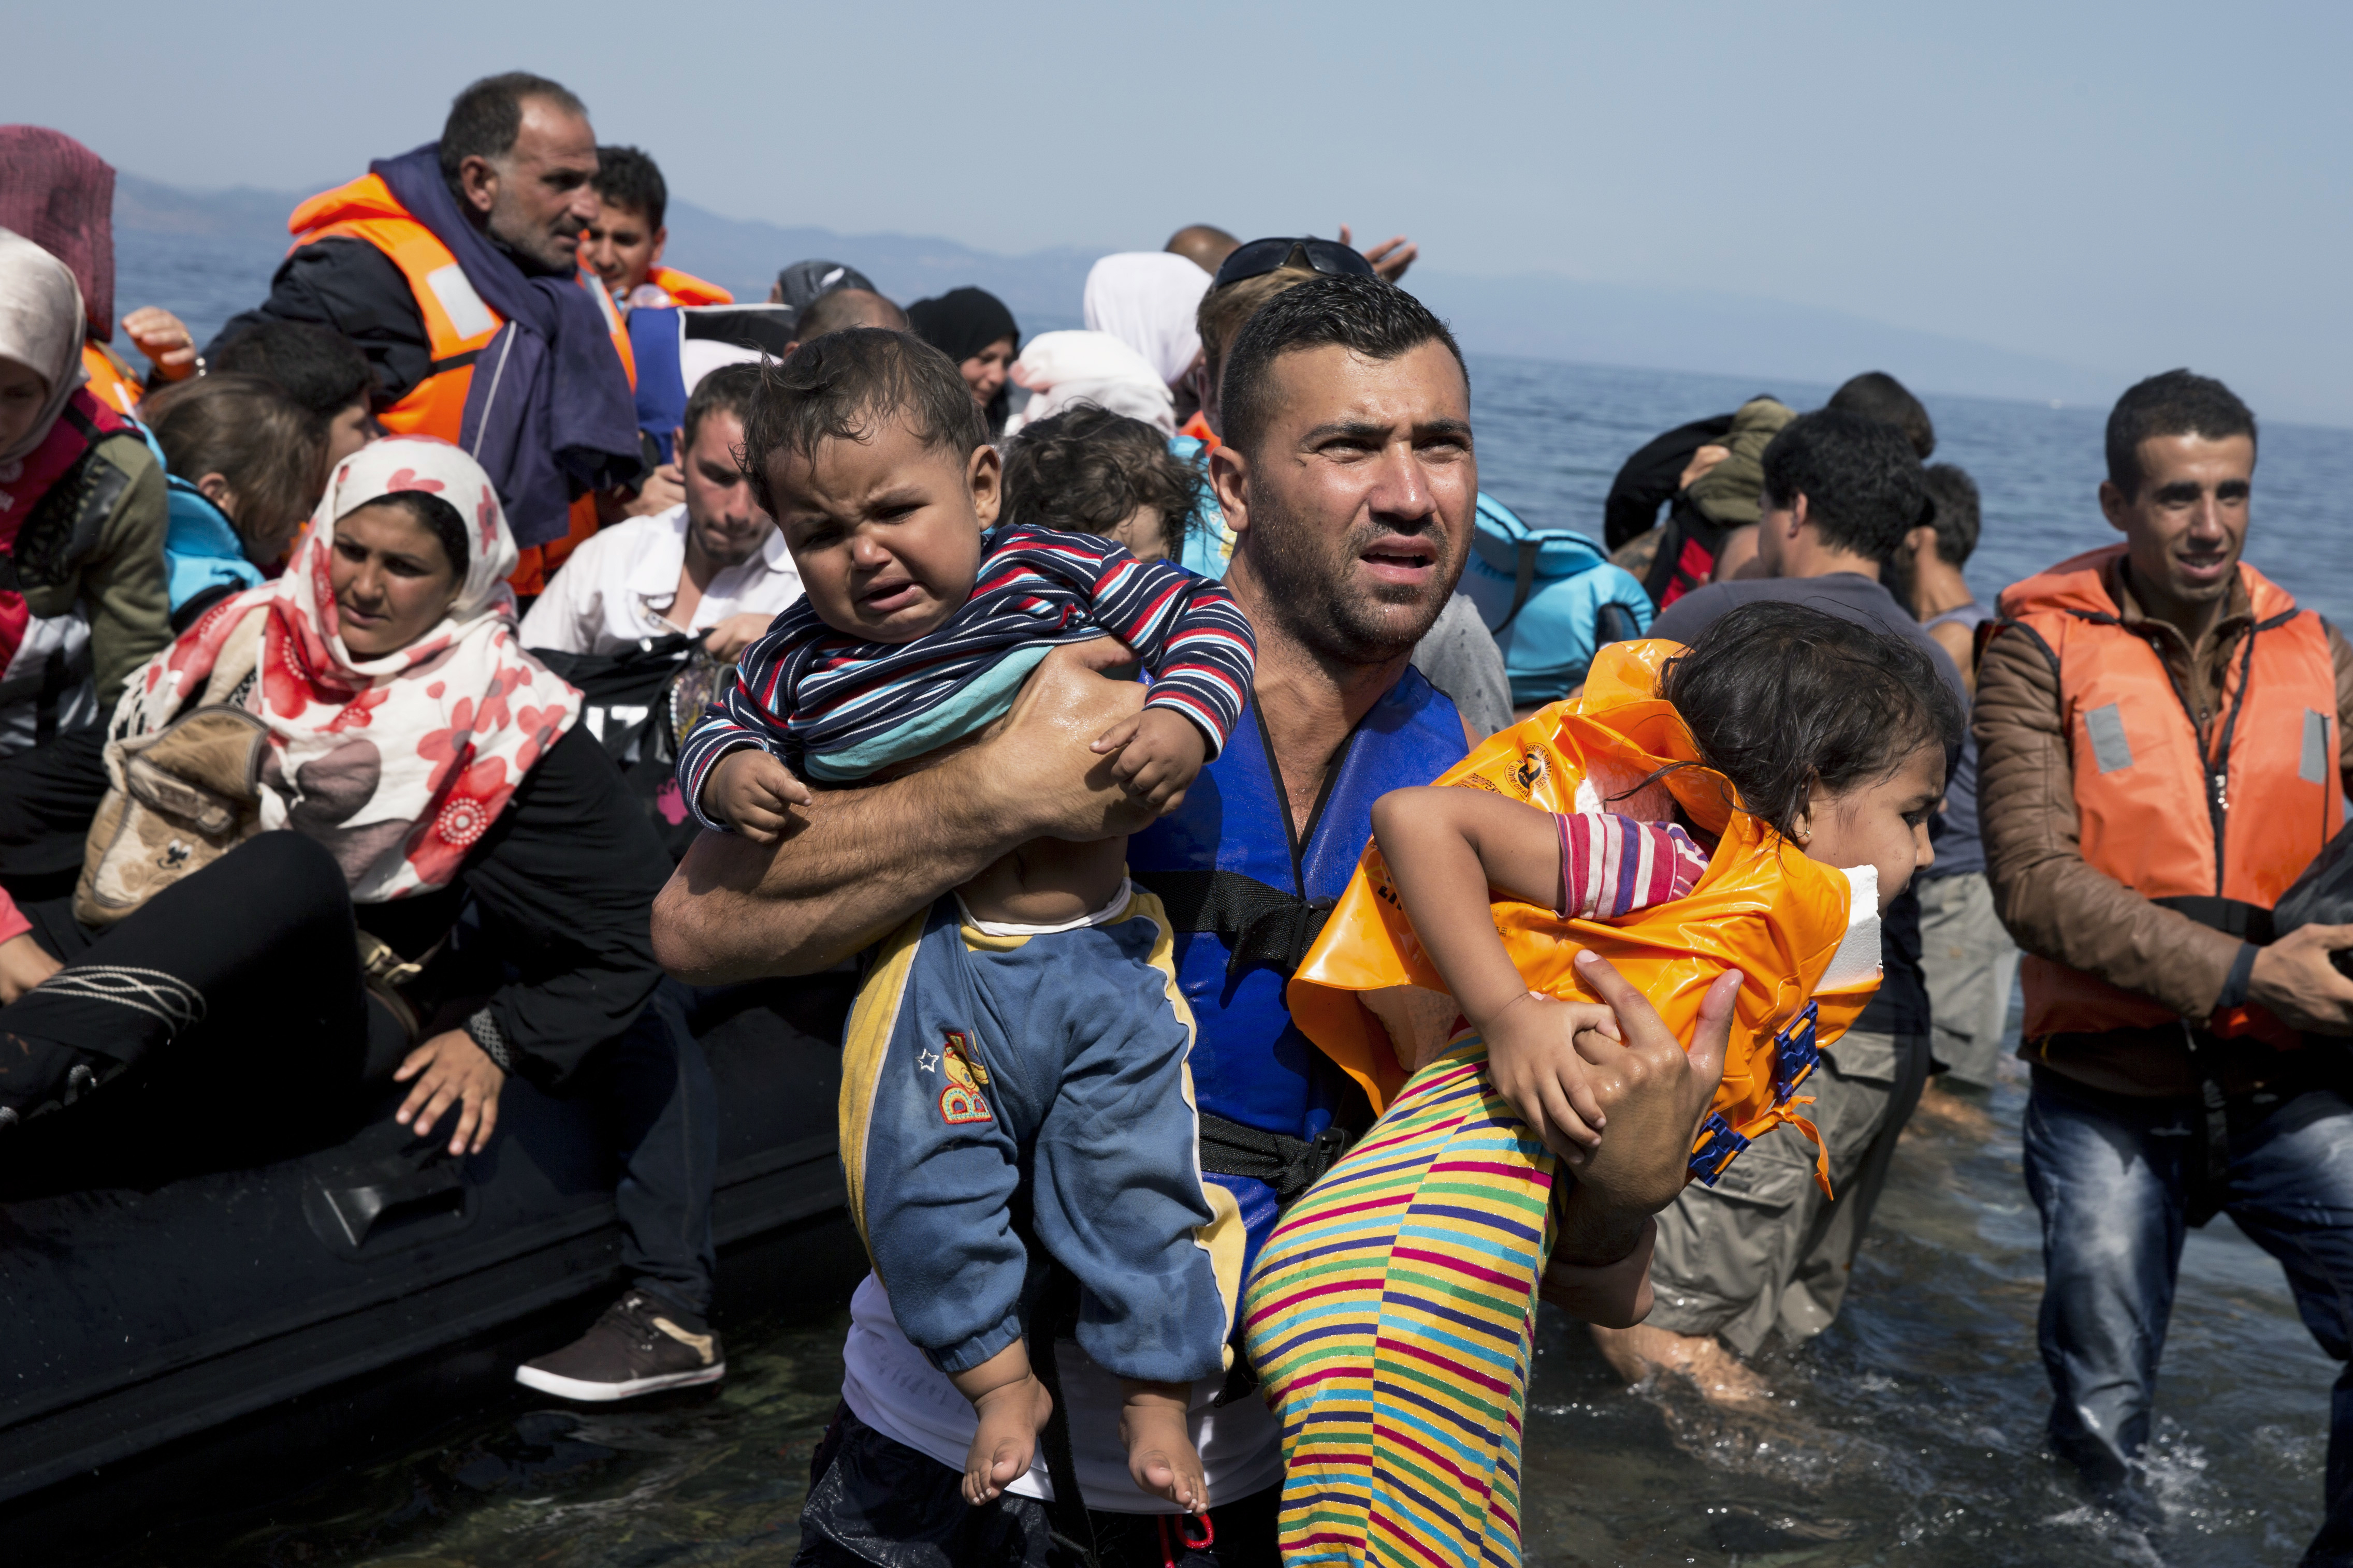 An aid worker carries two young children as Syrian refugees arrive on an overcrowded dinghy after crossing from Turkey to the island of Lesbos, Greece in 2015. The social upheaval related to the influx of refugees into Europe led a group of Greeks and migrants from several countries to launch Solomon